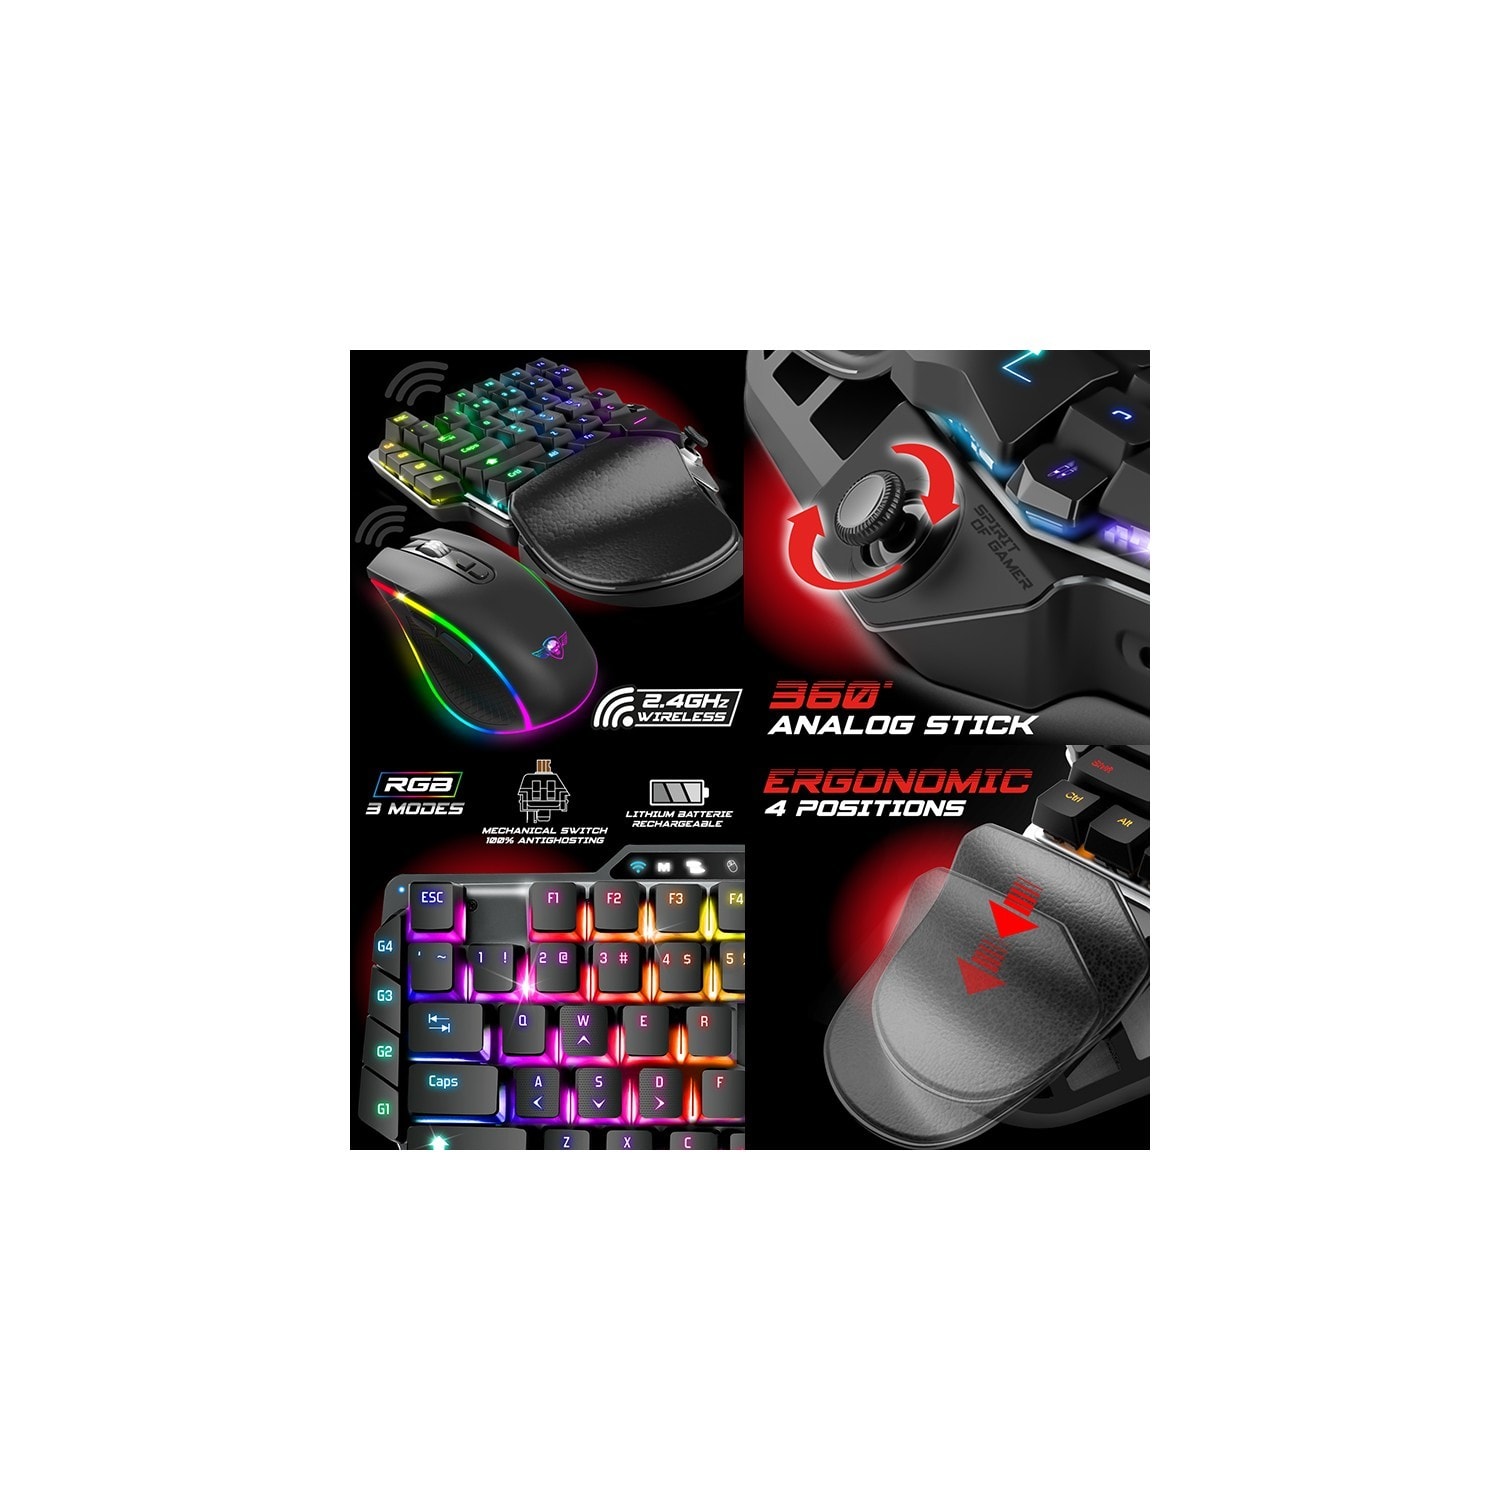 Pack clavier souris sans fil xpert wireless gameboard g1100 pour xbox,  ps4/ps5, switch, pc SPIRIT